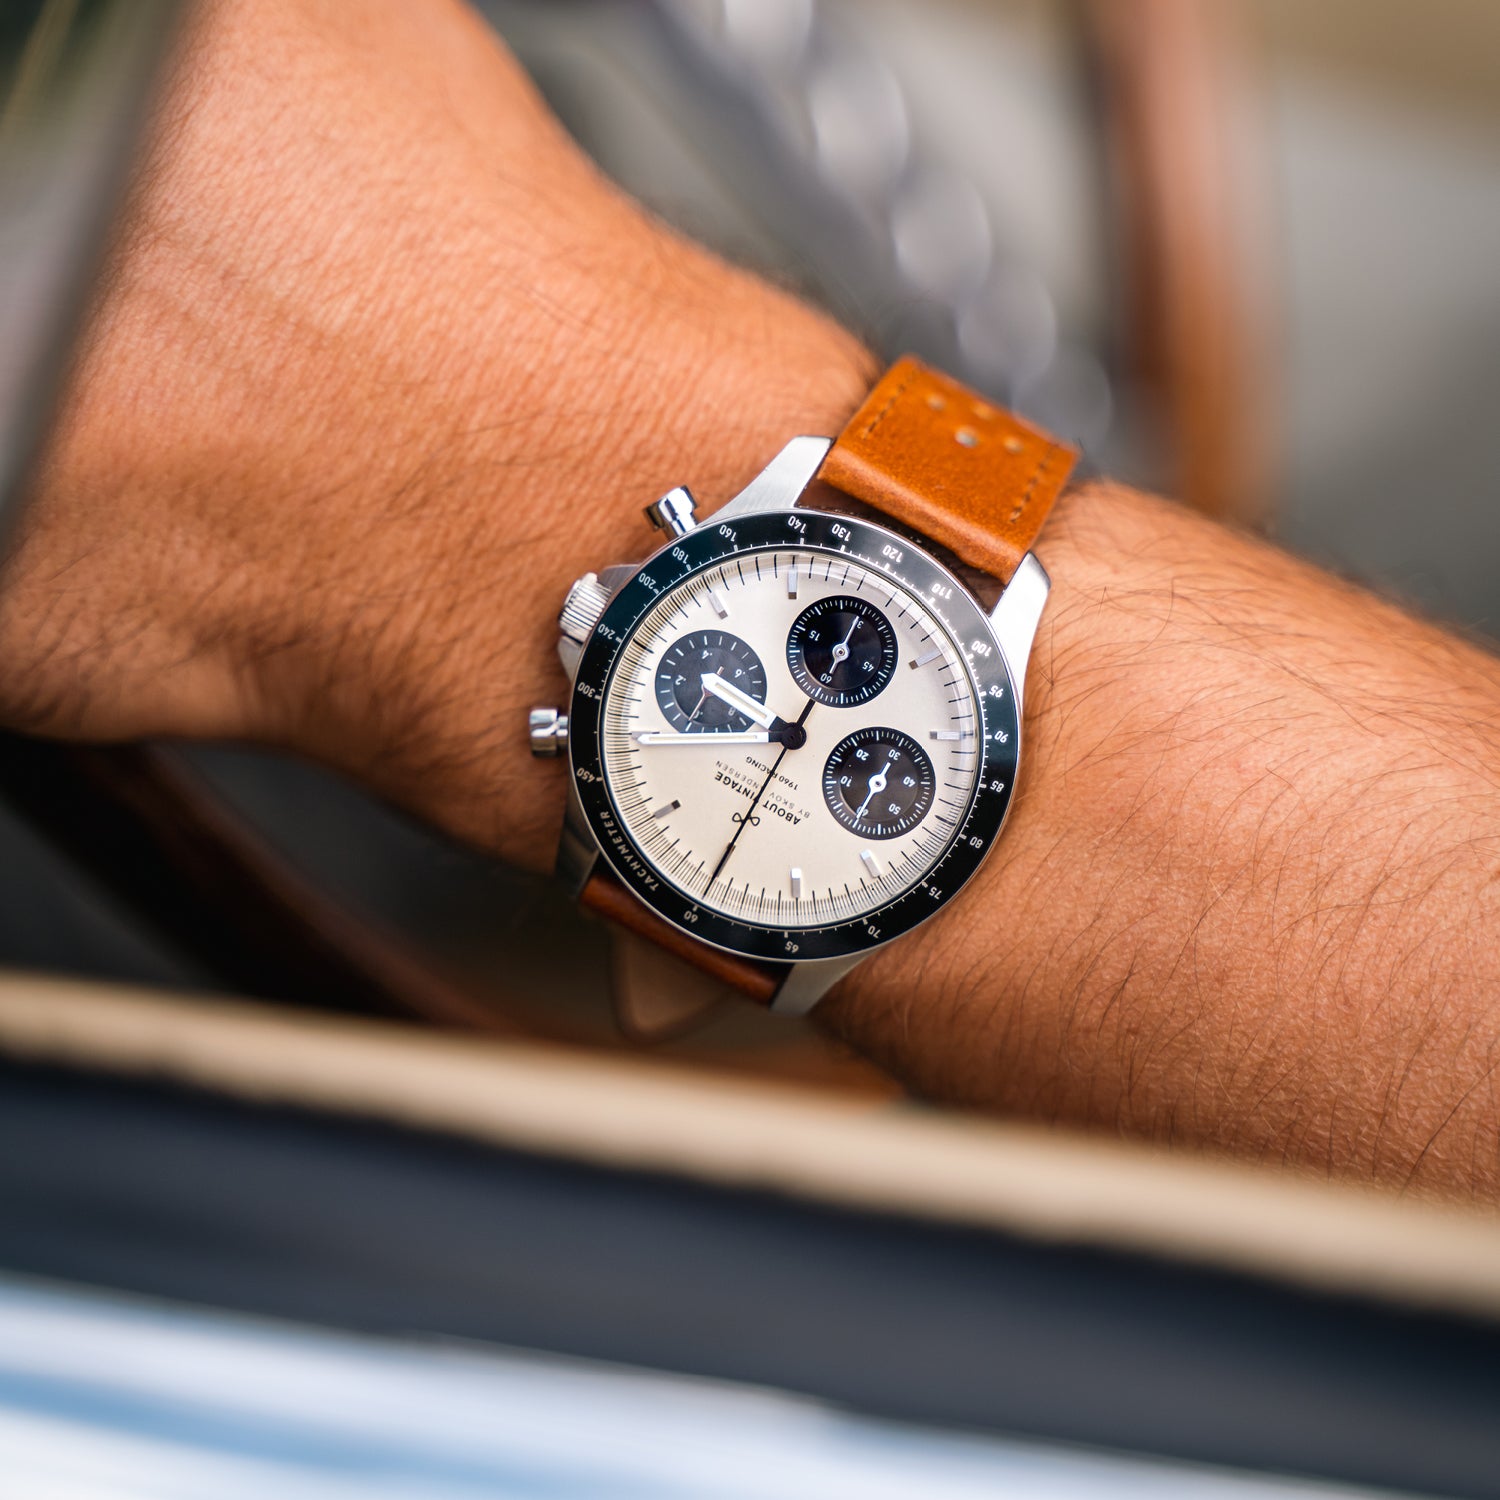 Watch-About Vintage-1960 Racing Chronograph-jpg